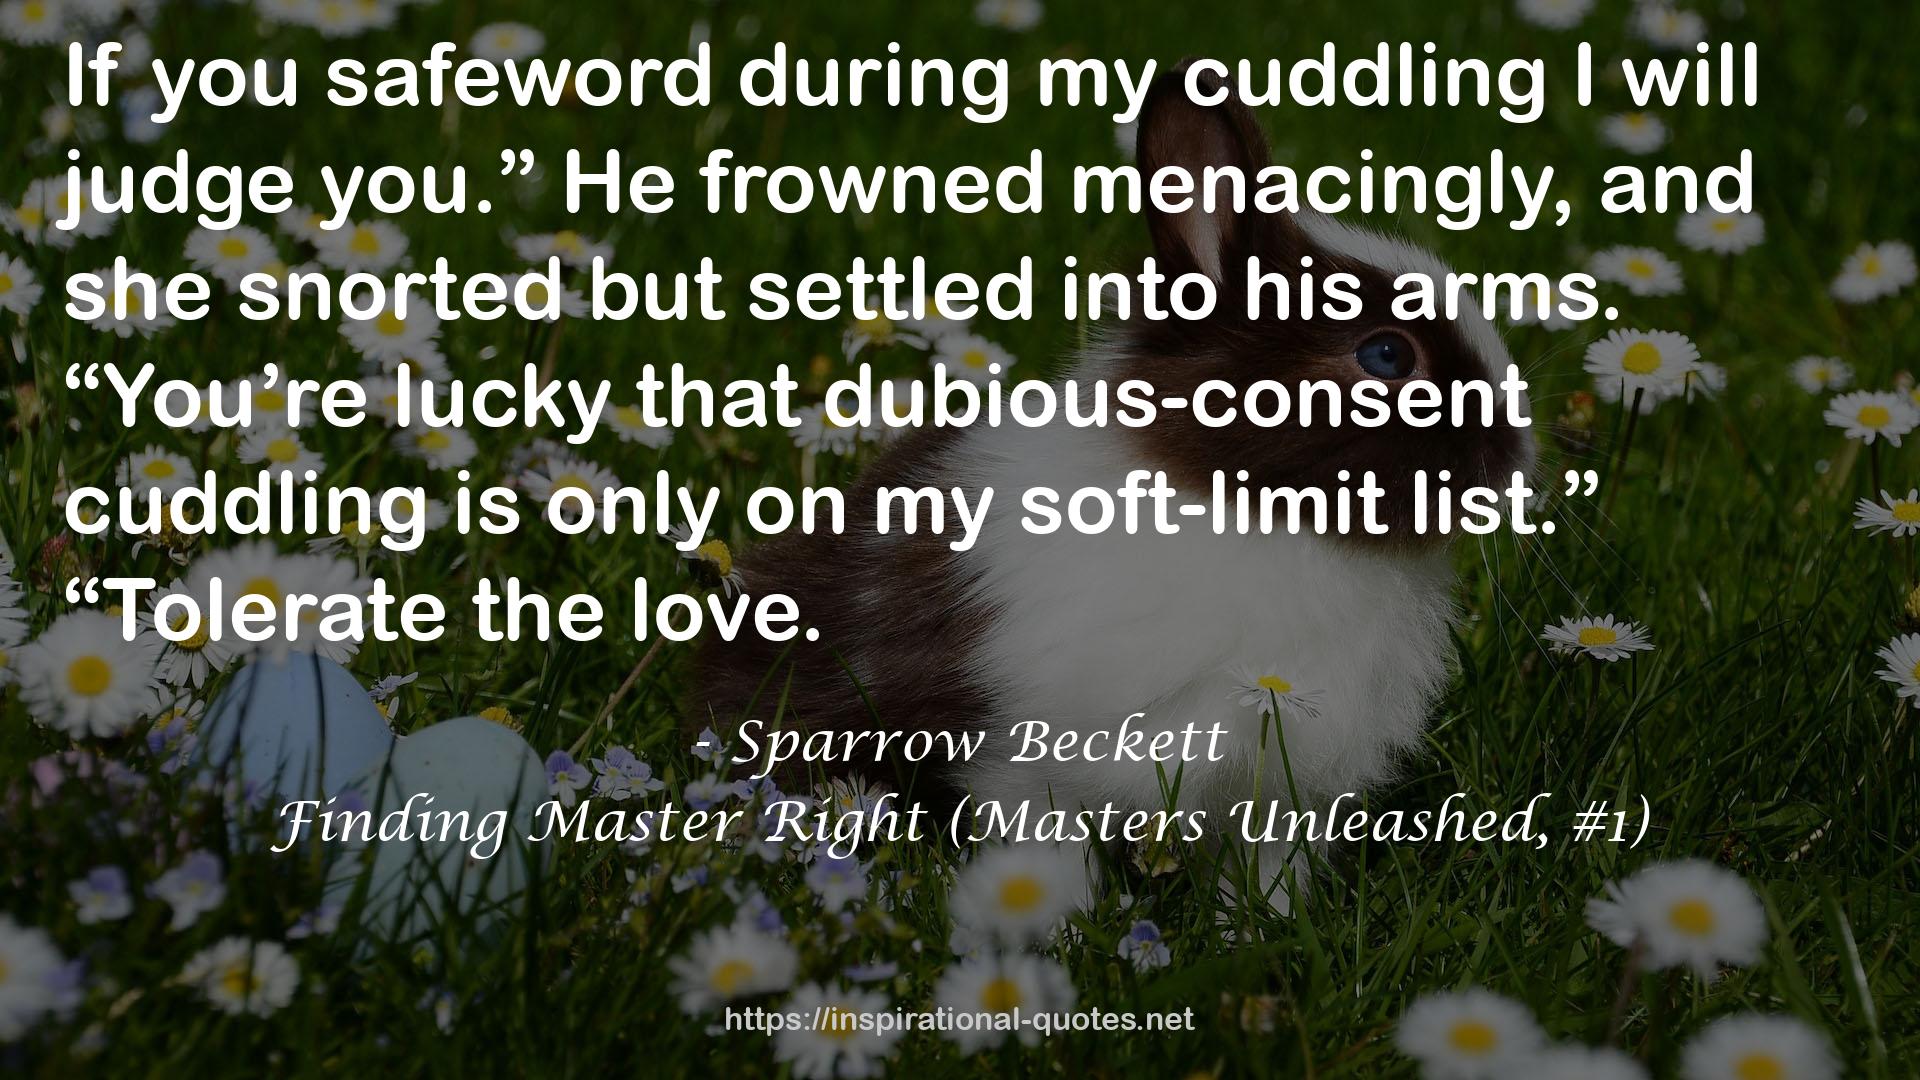 Finding Master Right (Masters Unleashed, #1) QUOTES